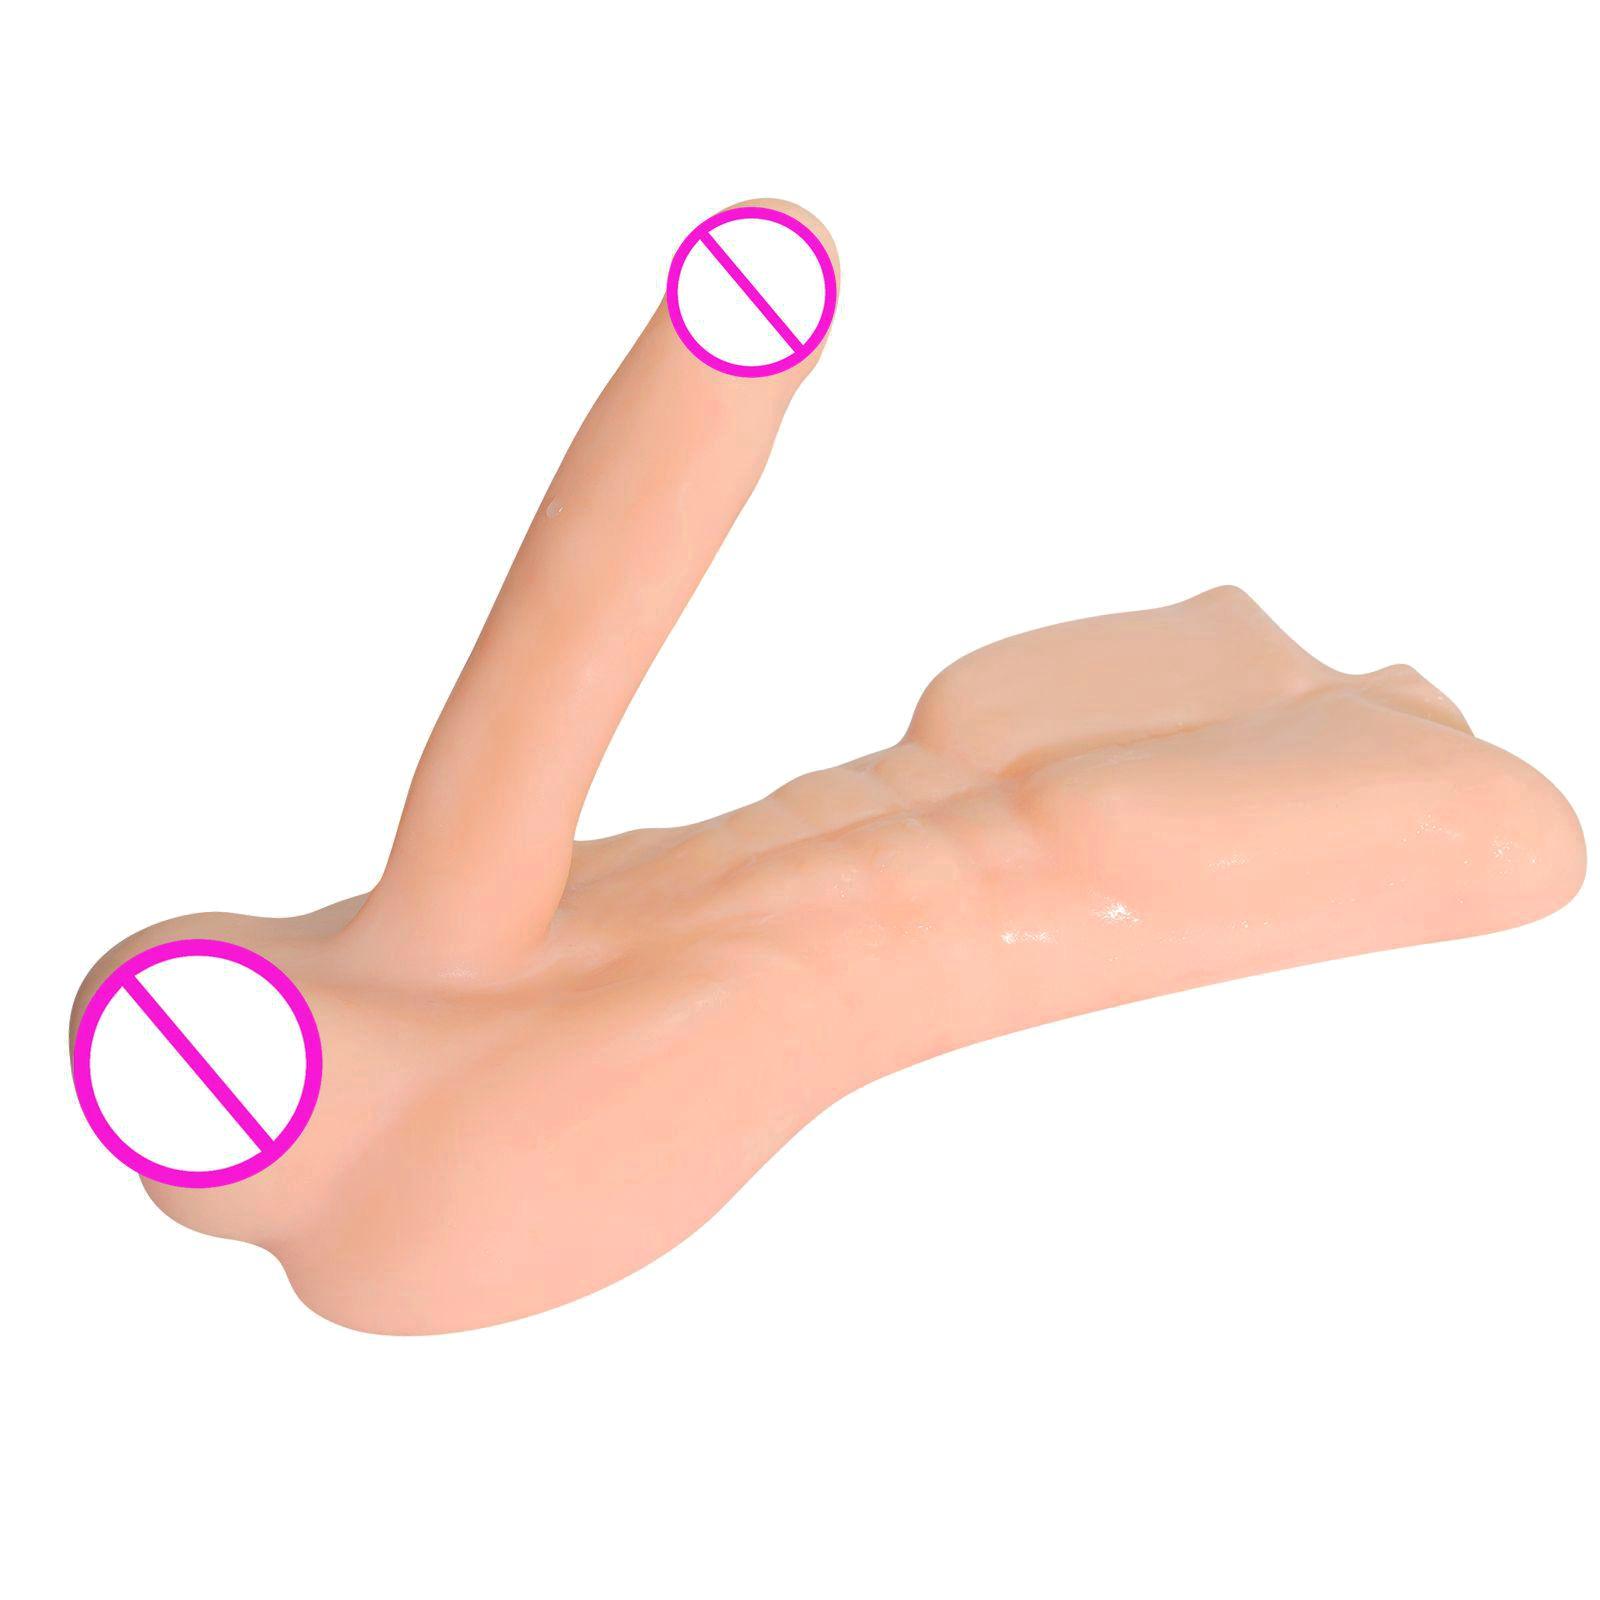 2kg 34cm Artificial Realistic Silicone Strong Abs Man Mini Sex Doll Huge Dildo Vagina G-spot Penis Sex Toy For Women Men Lesbian